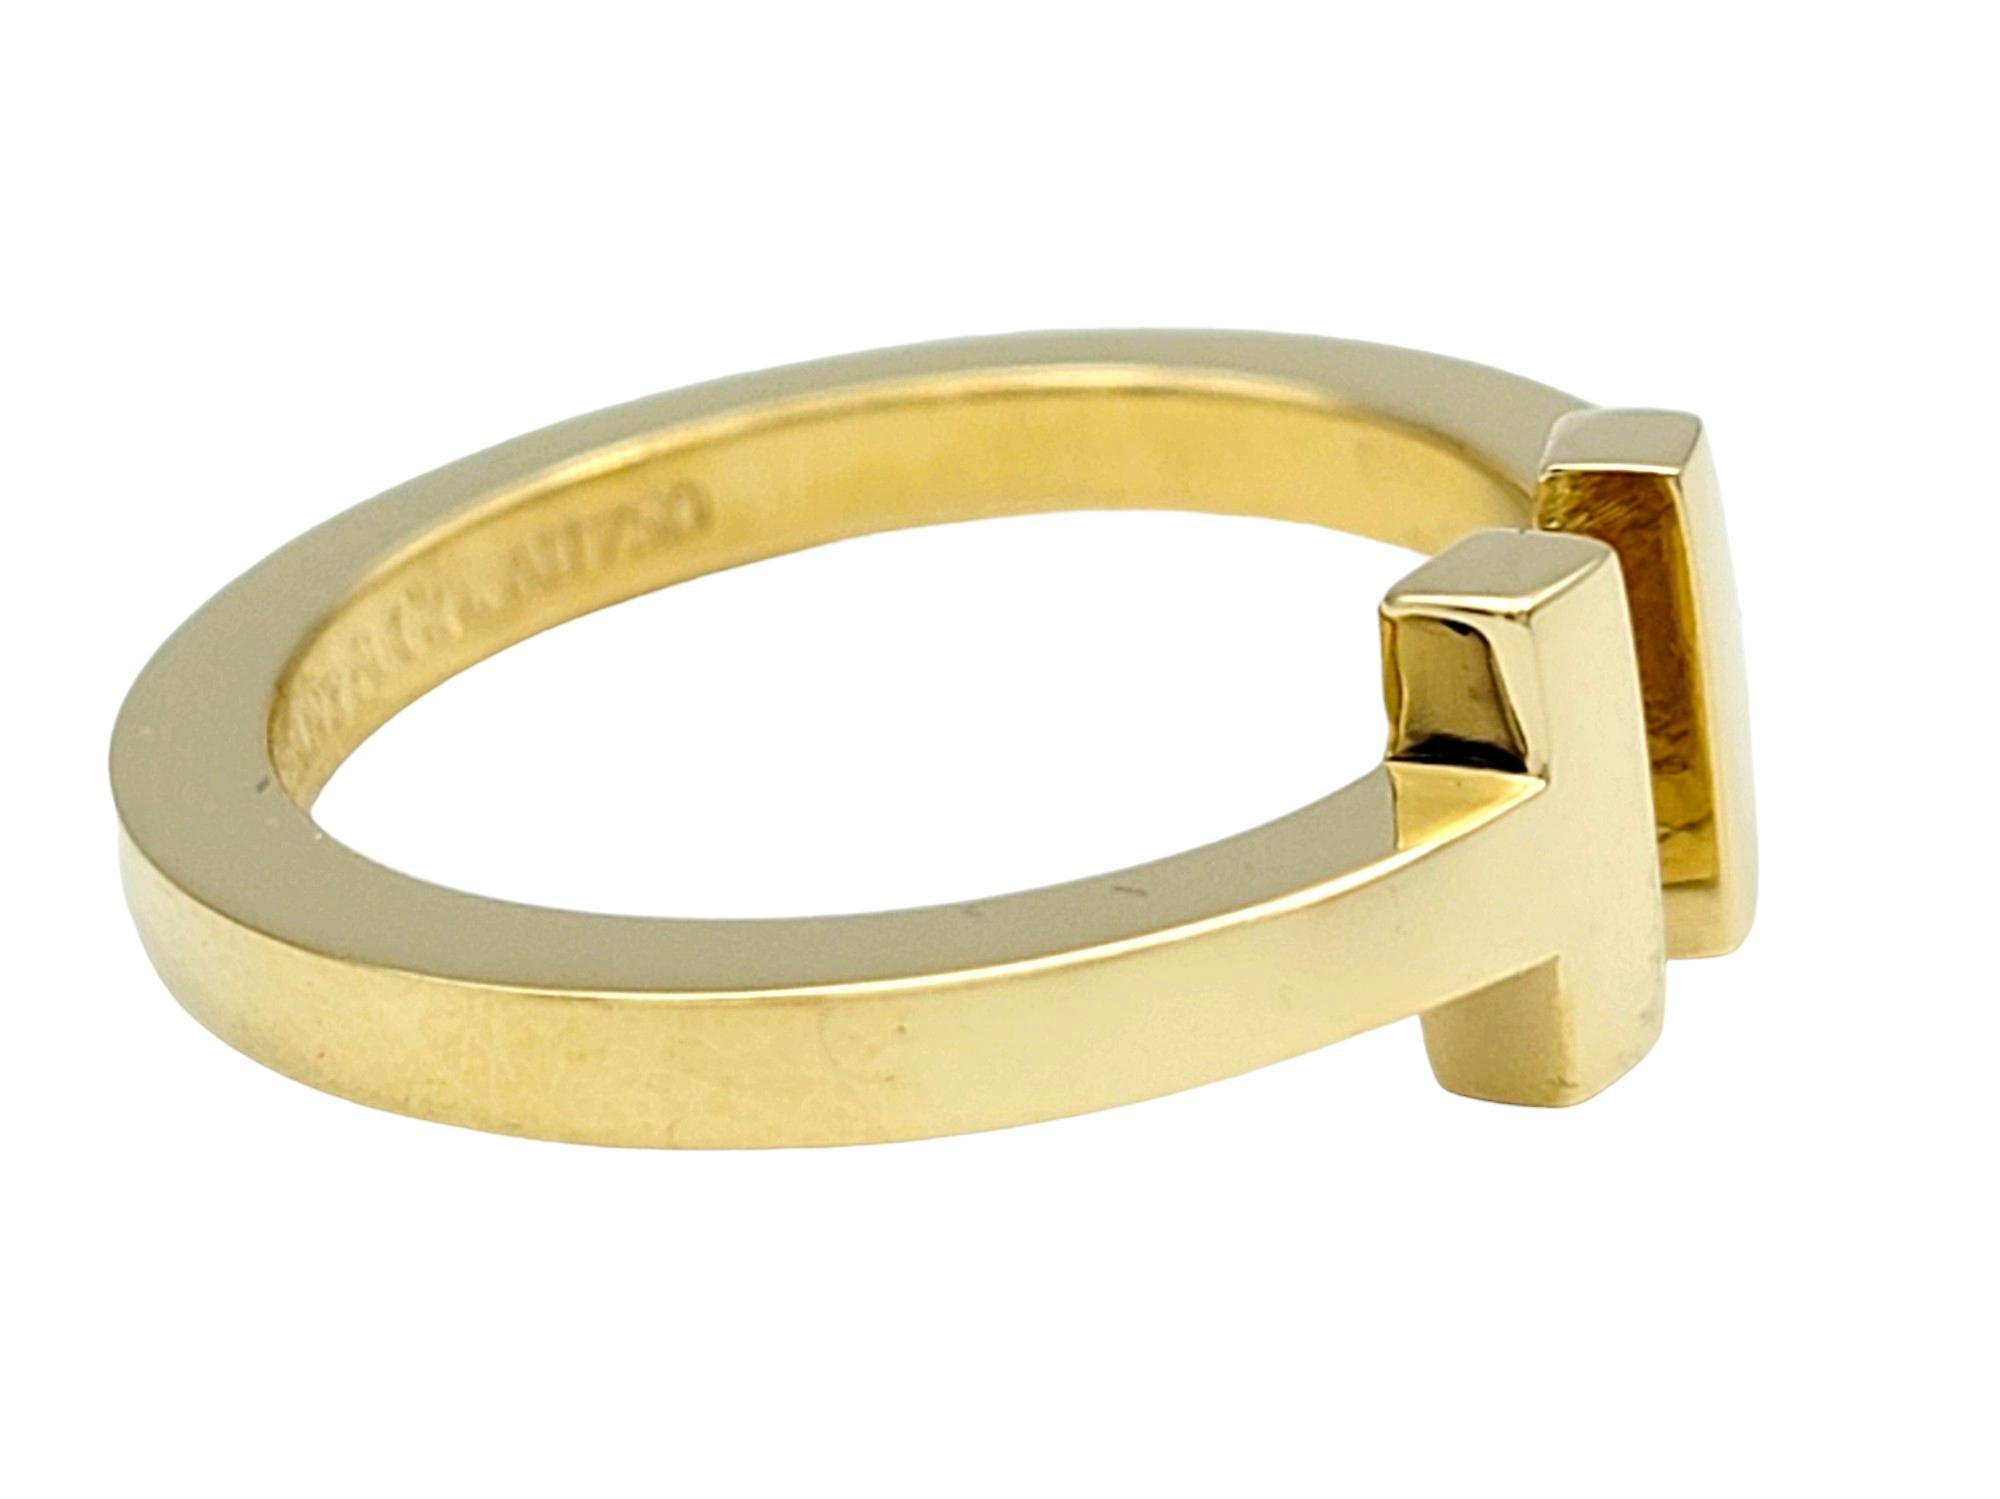 Tiffany & Co. Tiffany T Square High Polished Band Ring in 18 Karat Yellow Gold In Good Condition For Sale In Scottsdale, AZ